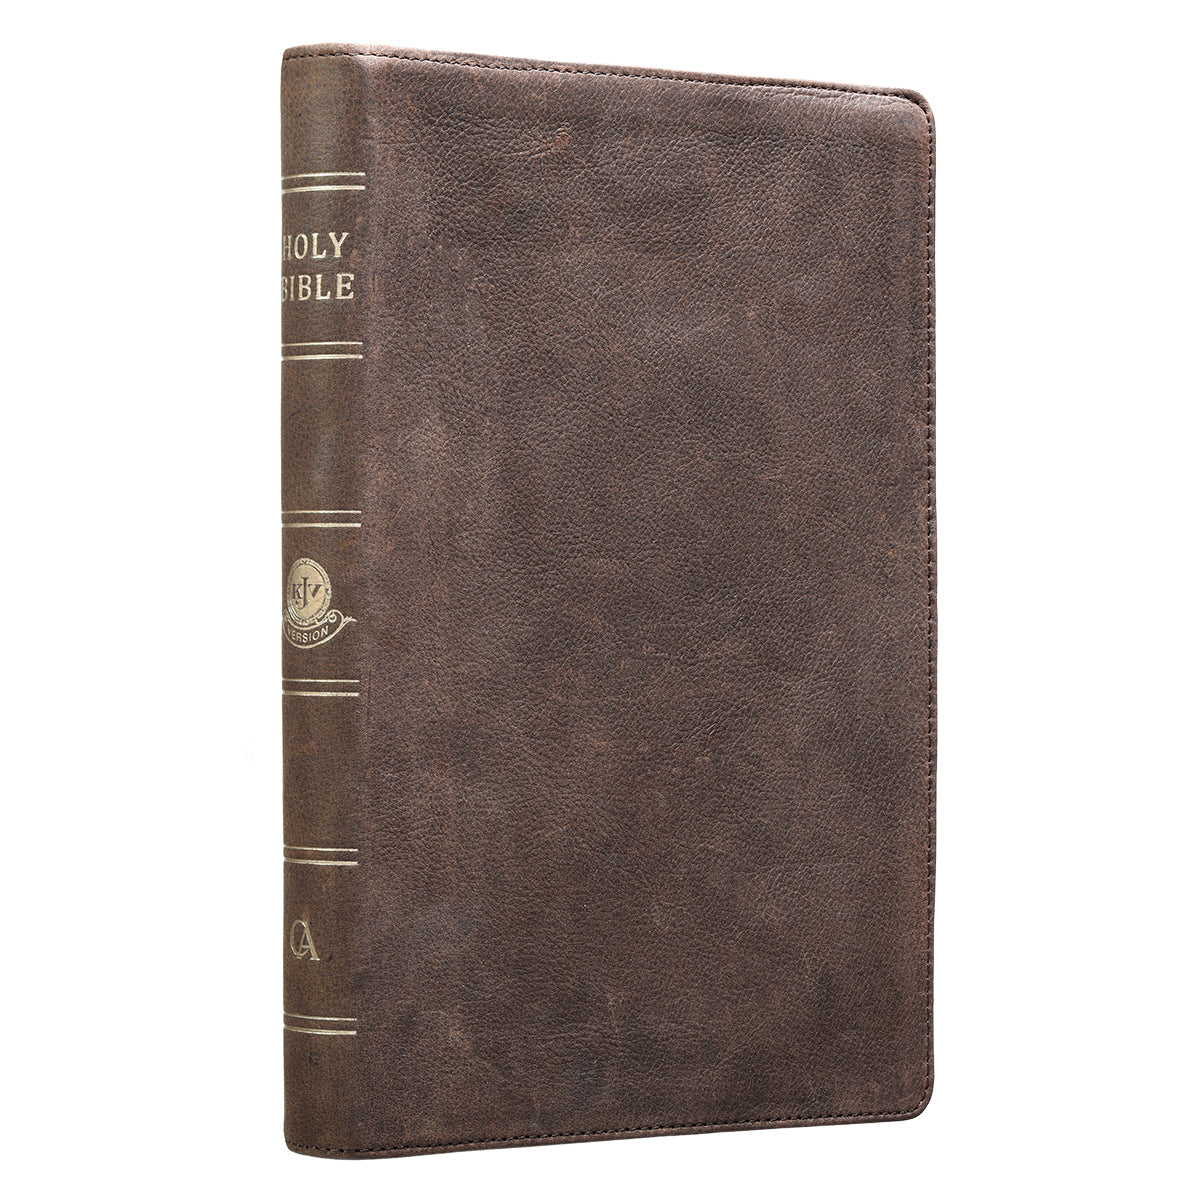 Image of KJV Large Print Dark Brown Premium Leather with Thumb Index other